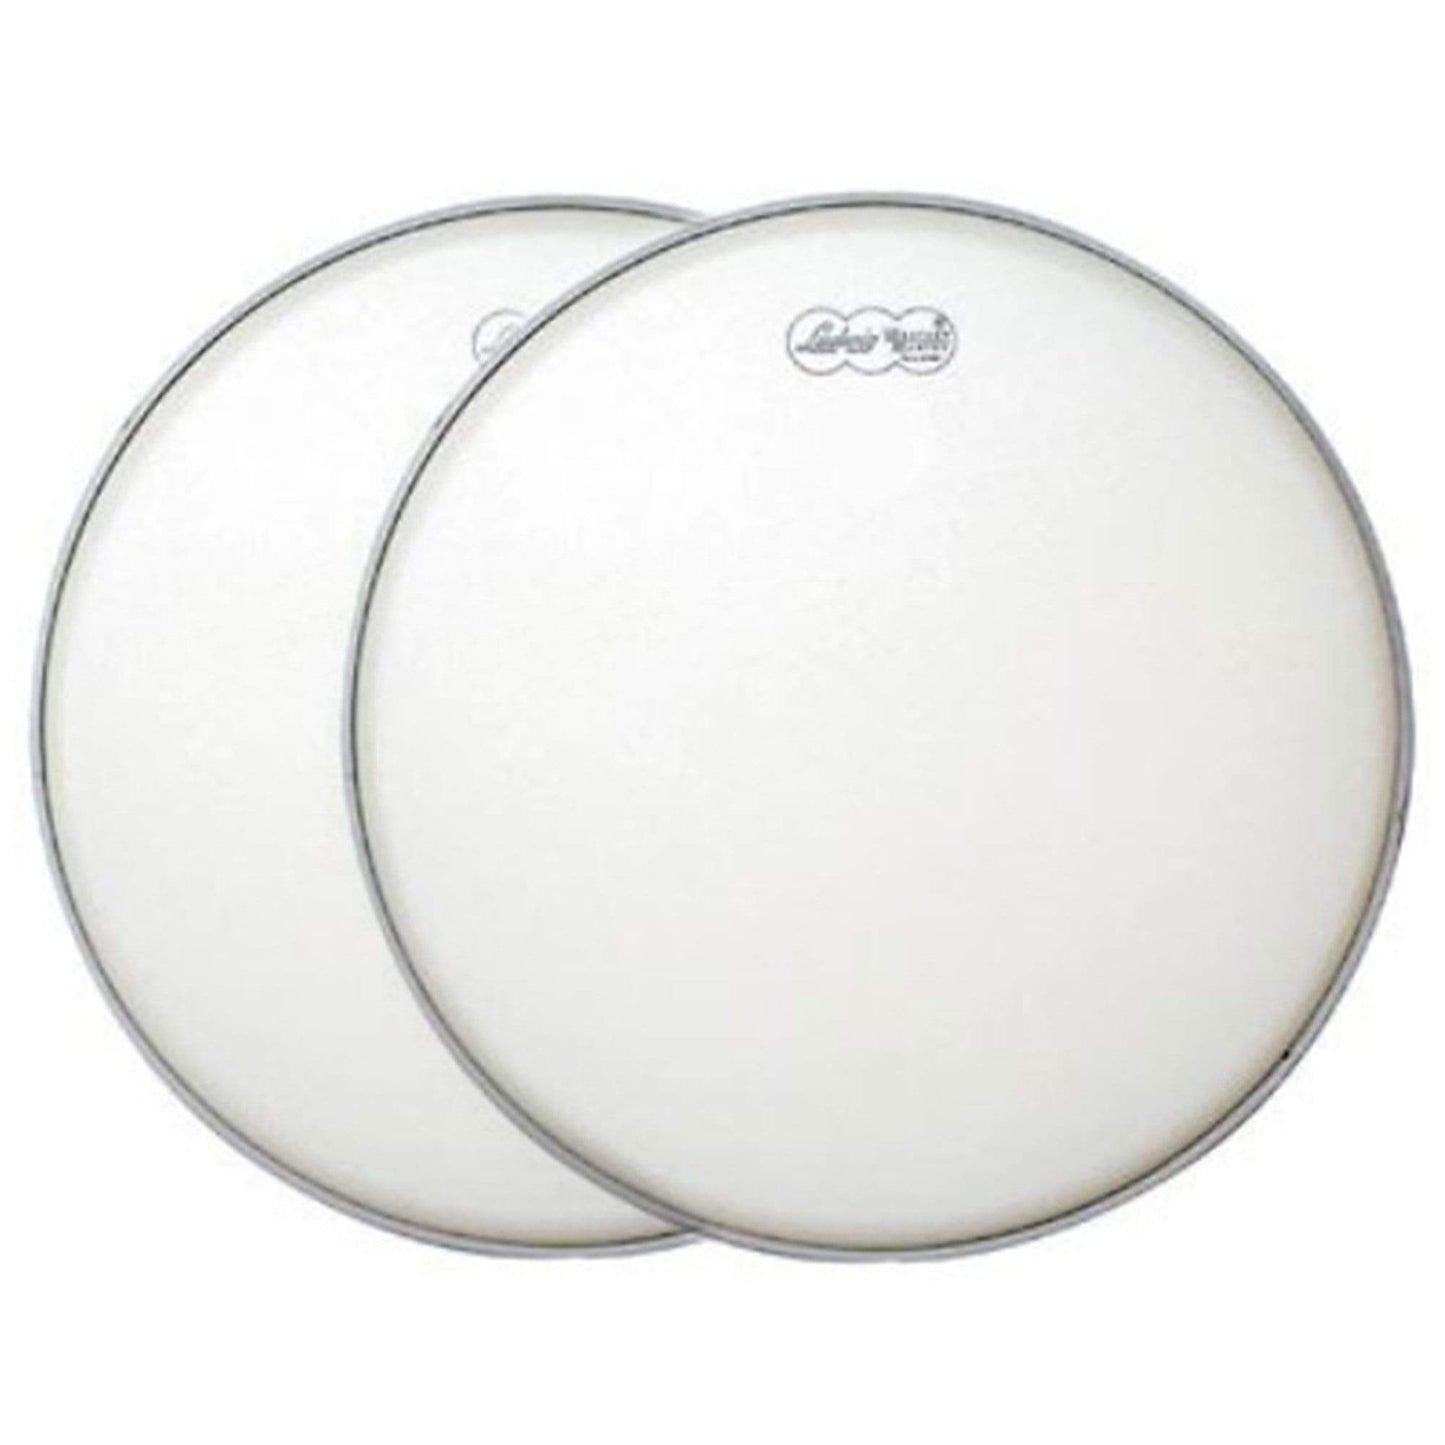 Ludwig 13" Medium Coated Weather Master Batter Drum Head (2 Pack Bundle) Drums and Percussion / Parts and Accessories / Heads